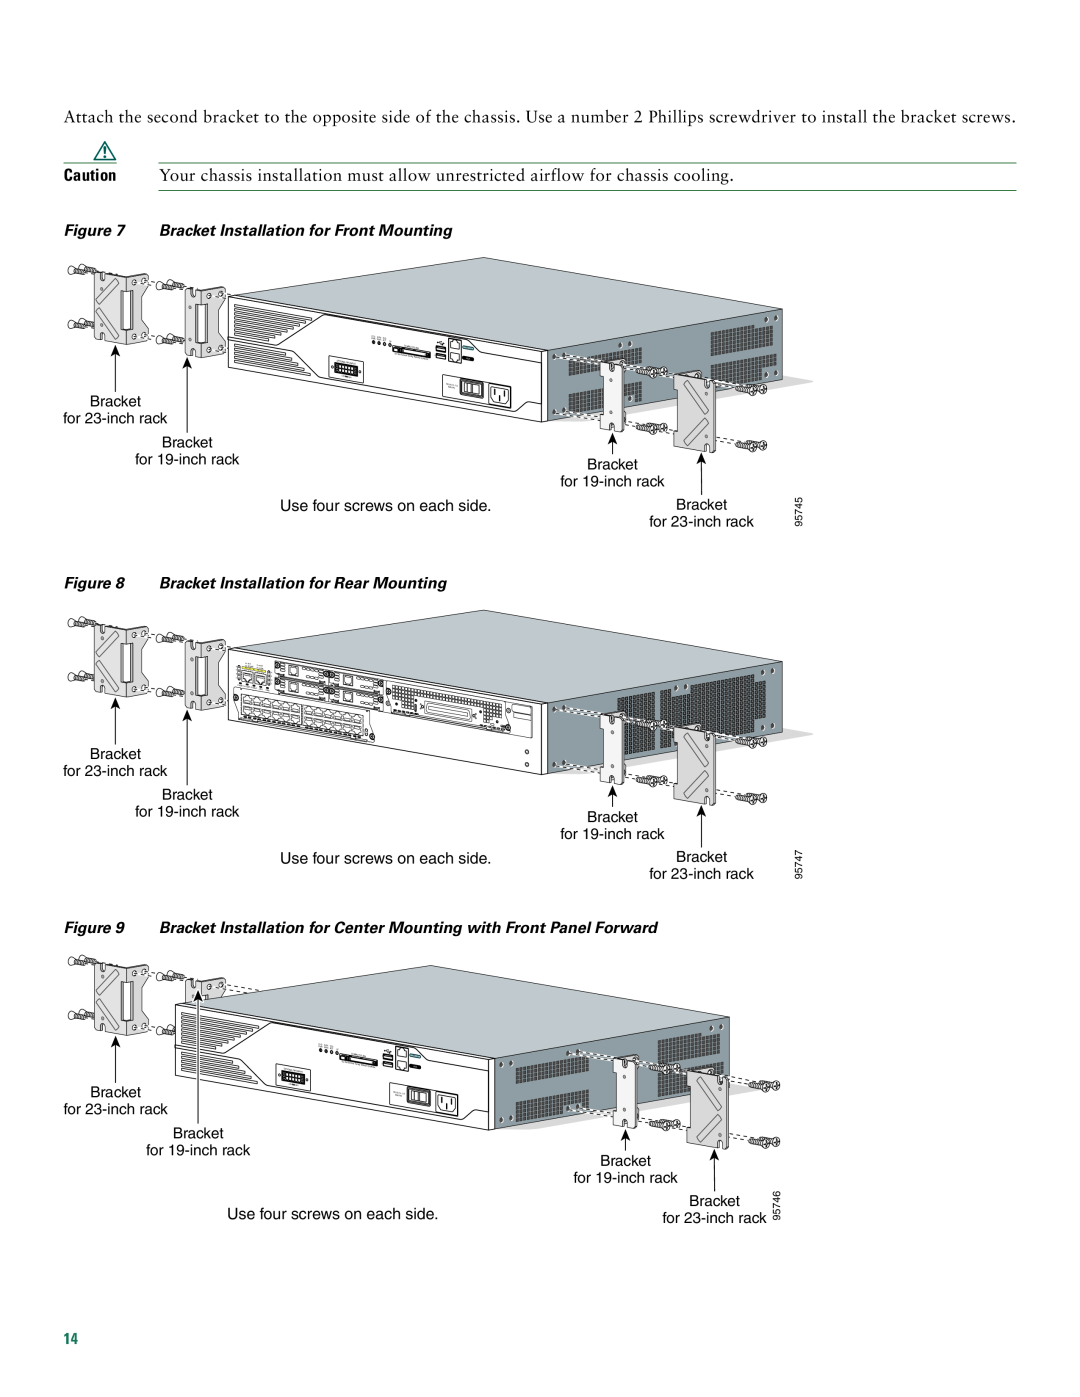 Cisco Systems 2800 manual Bracket Installation for Front Mounting, Bracket Installation for Rear Mounting 